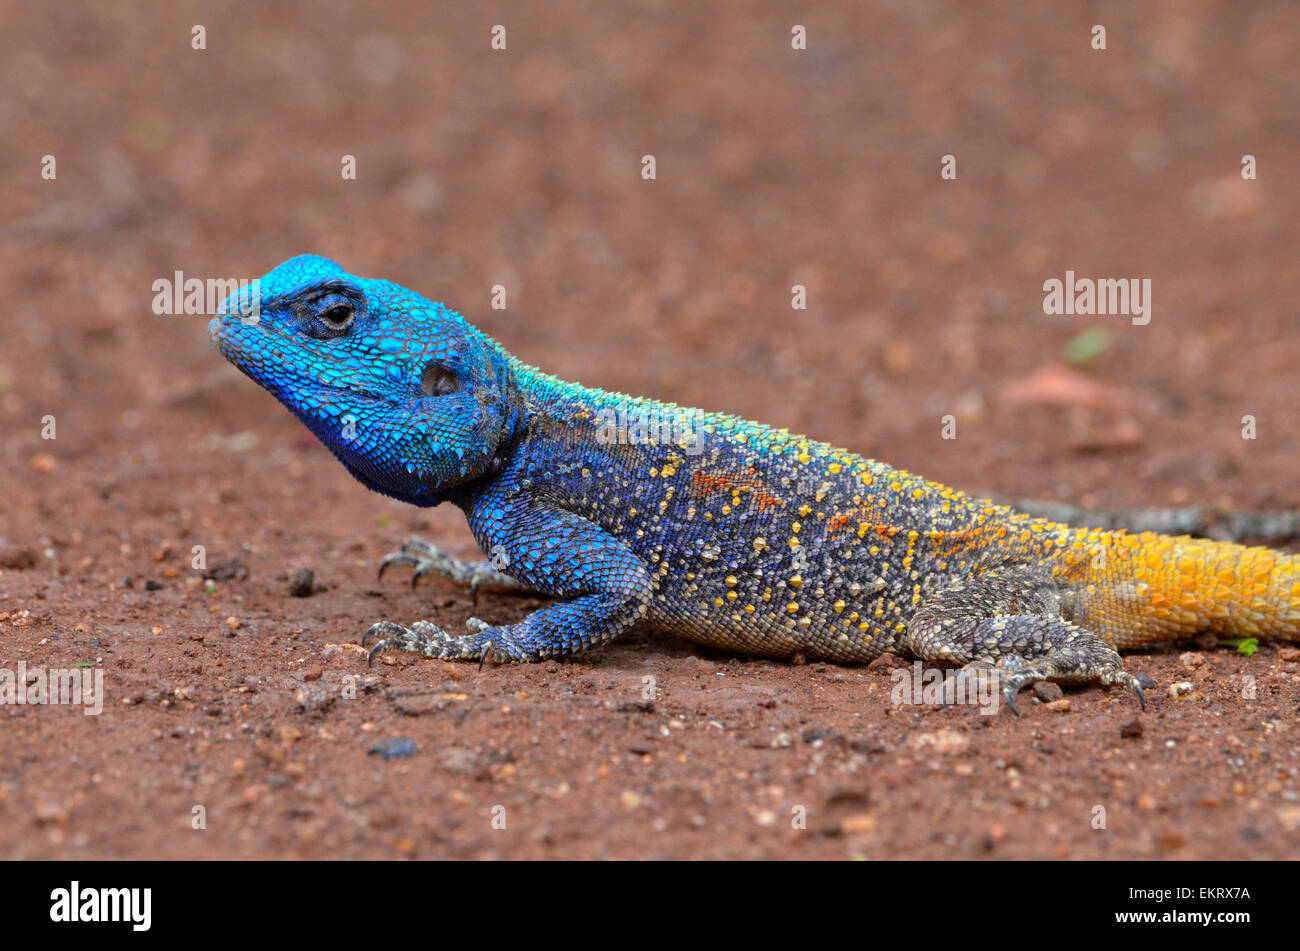 Colourful blue headed agama lizard sitting on the ground, Kruger park